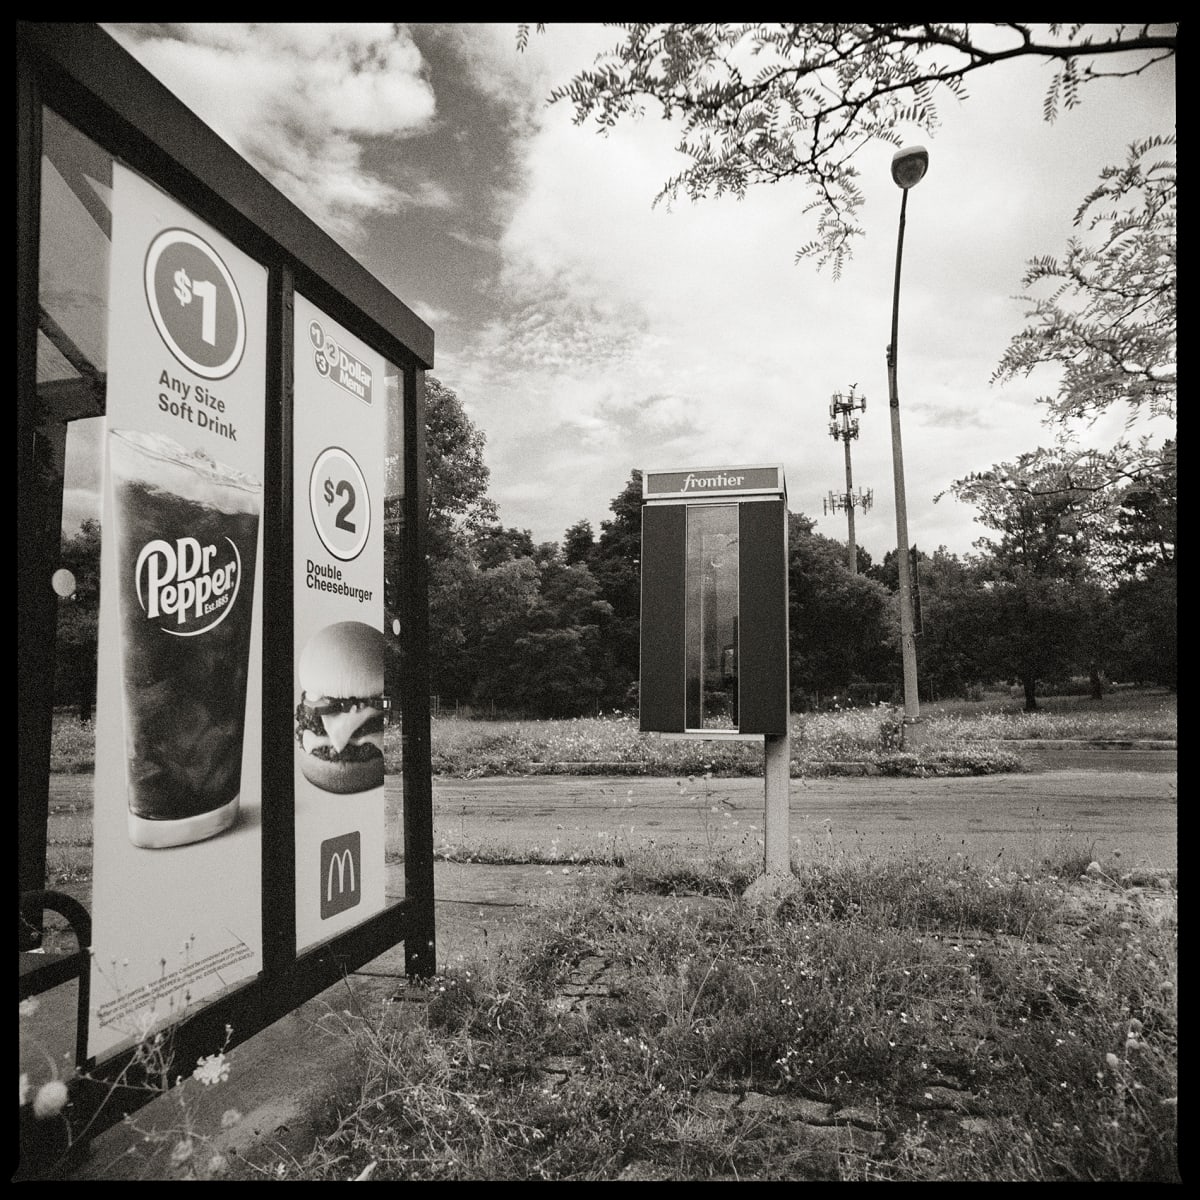 585.385.9292 – NYS Department of Transportation, 830 Pittsford-Victor Road, Pittsford, NY 14534 by Eric T. Kunsman  Image: ID: A black and white image shows a payphone standing to the right of a bus stop.  There is a road to the right of the payphone.